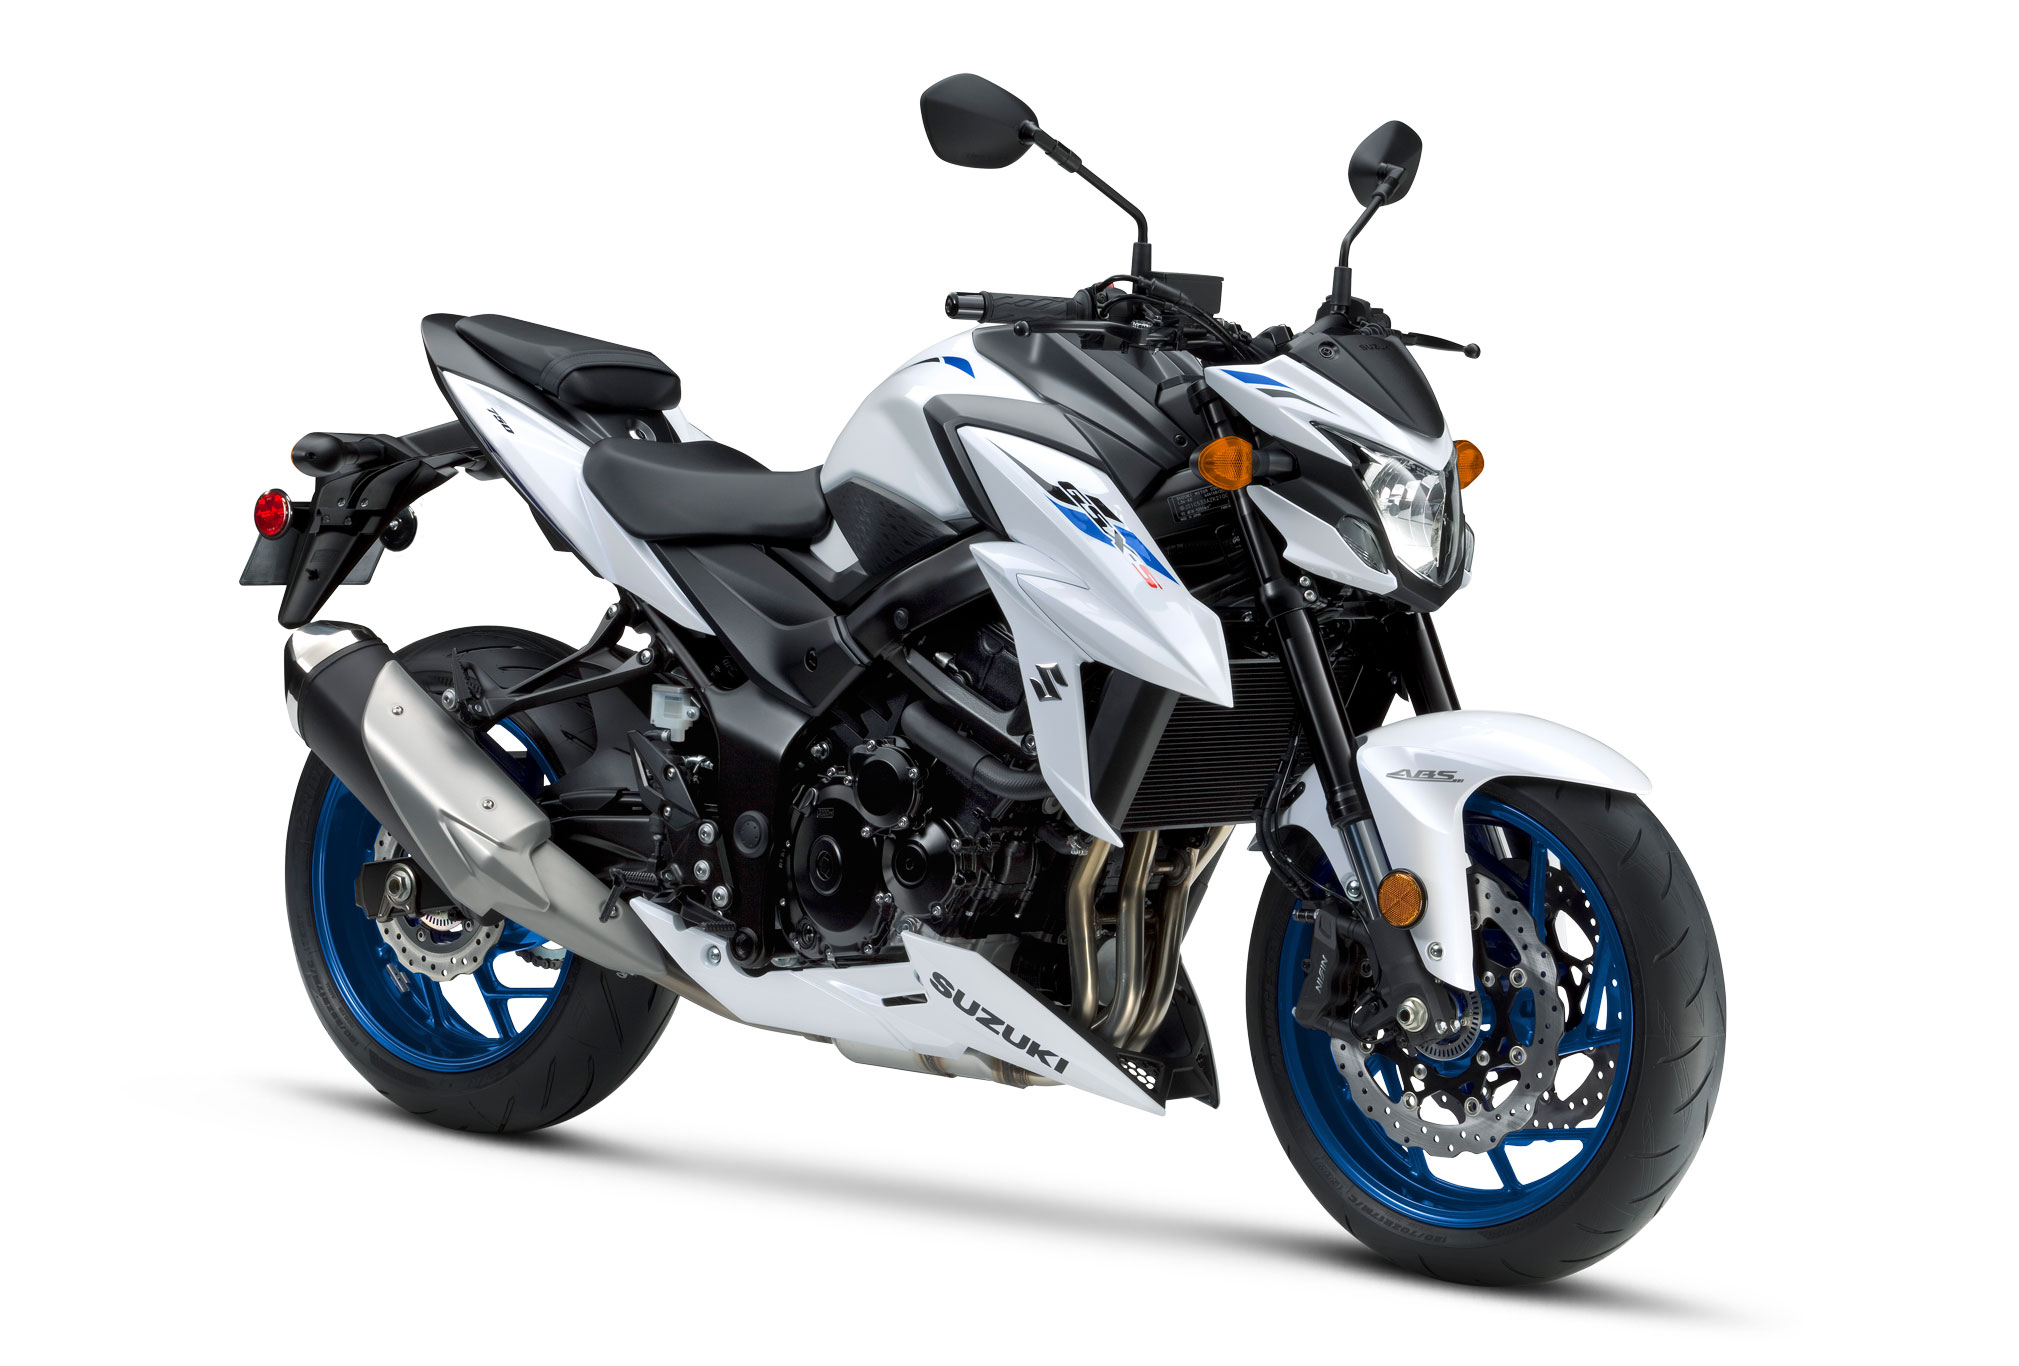 2019 Suzuki GSXS750 ABS Guide • Total Motorcycle